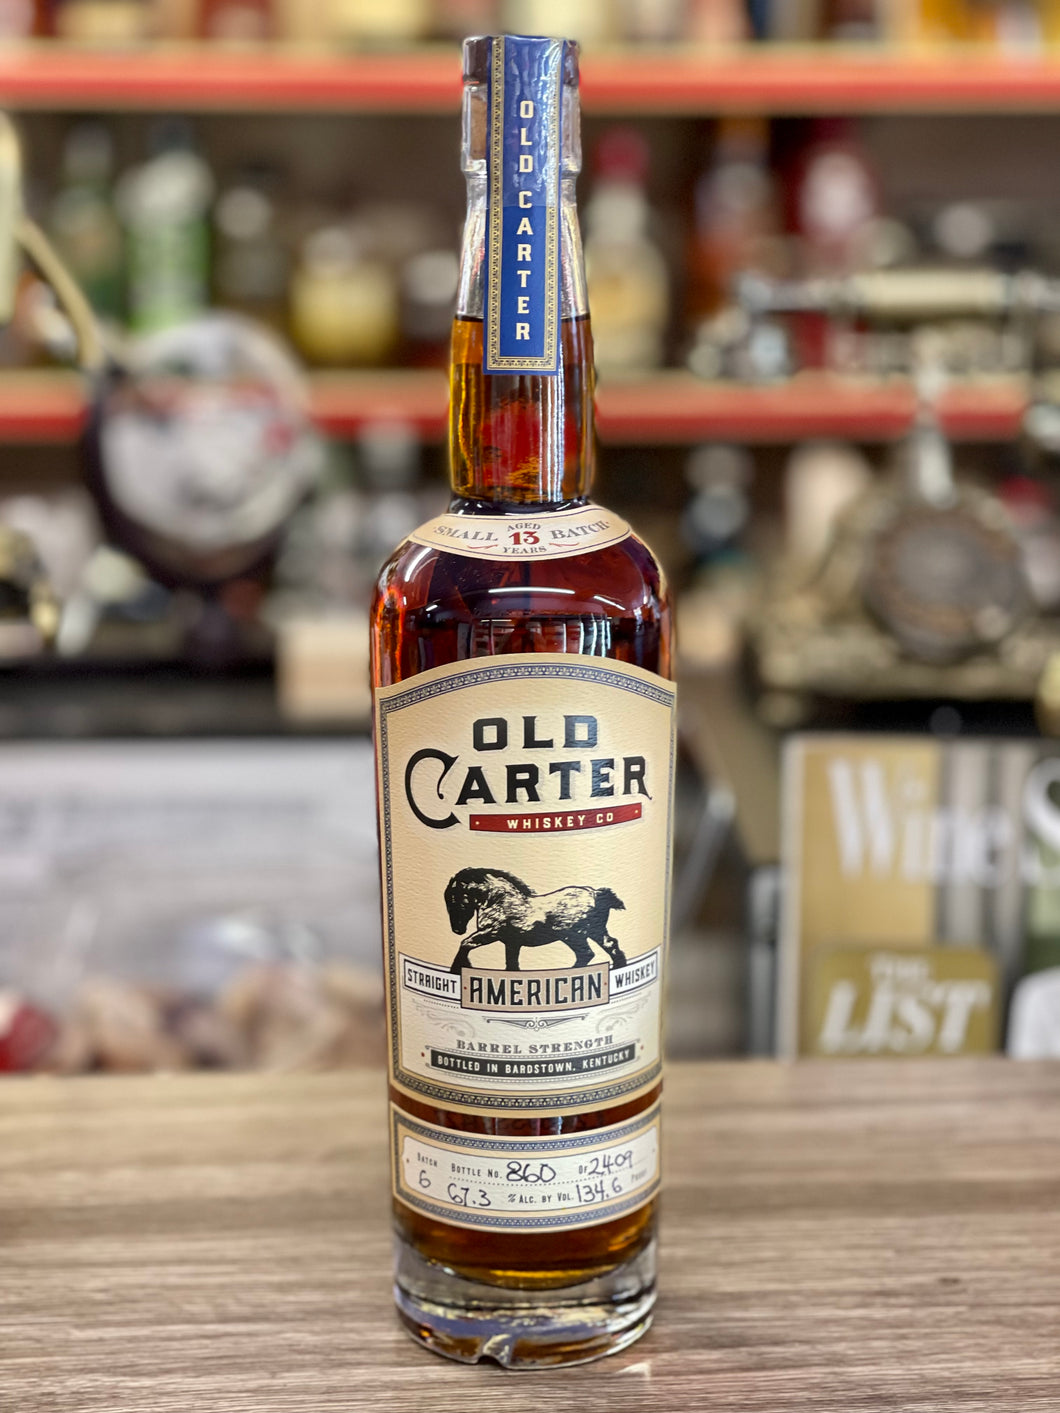 Old Carter Small Batch 13 Year Old Bourbon Whiskey